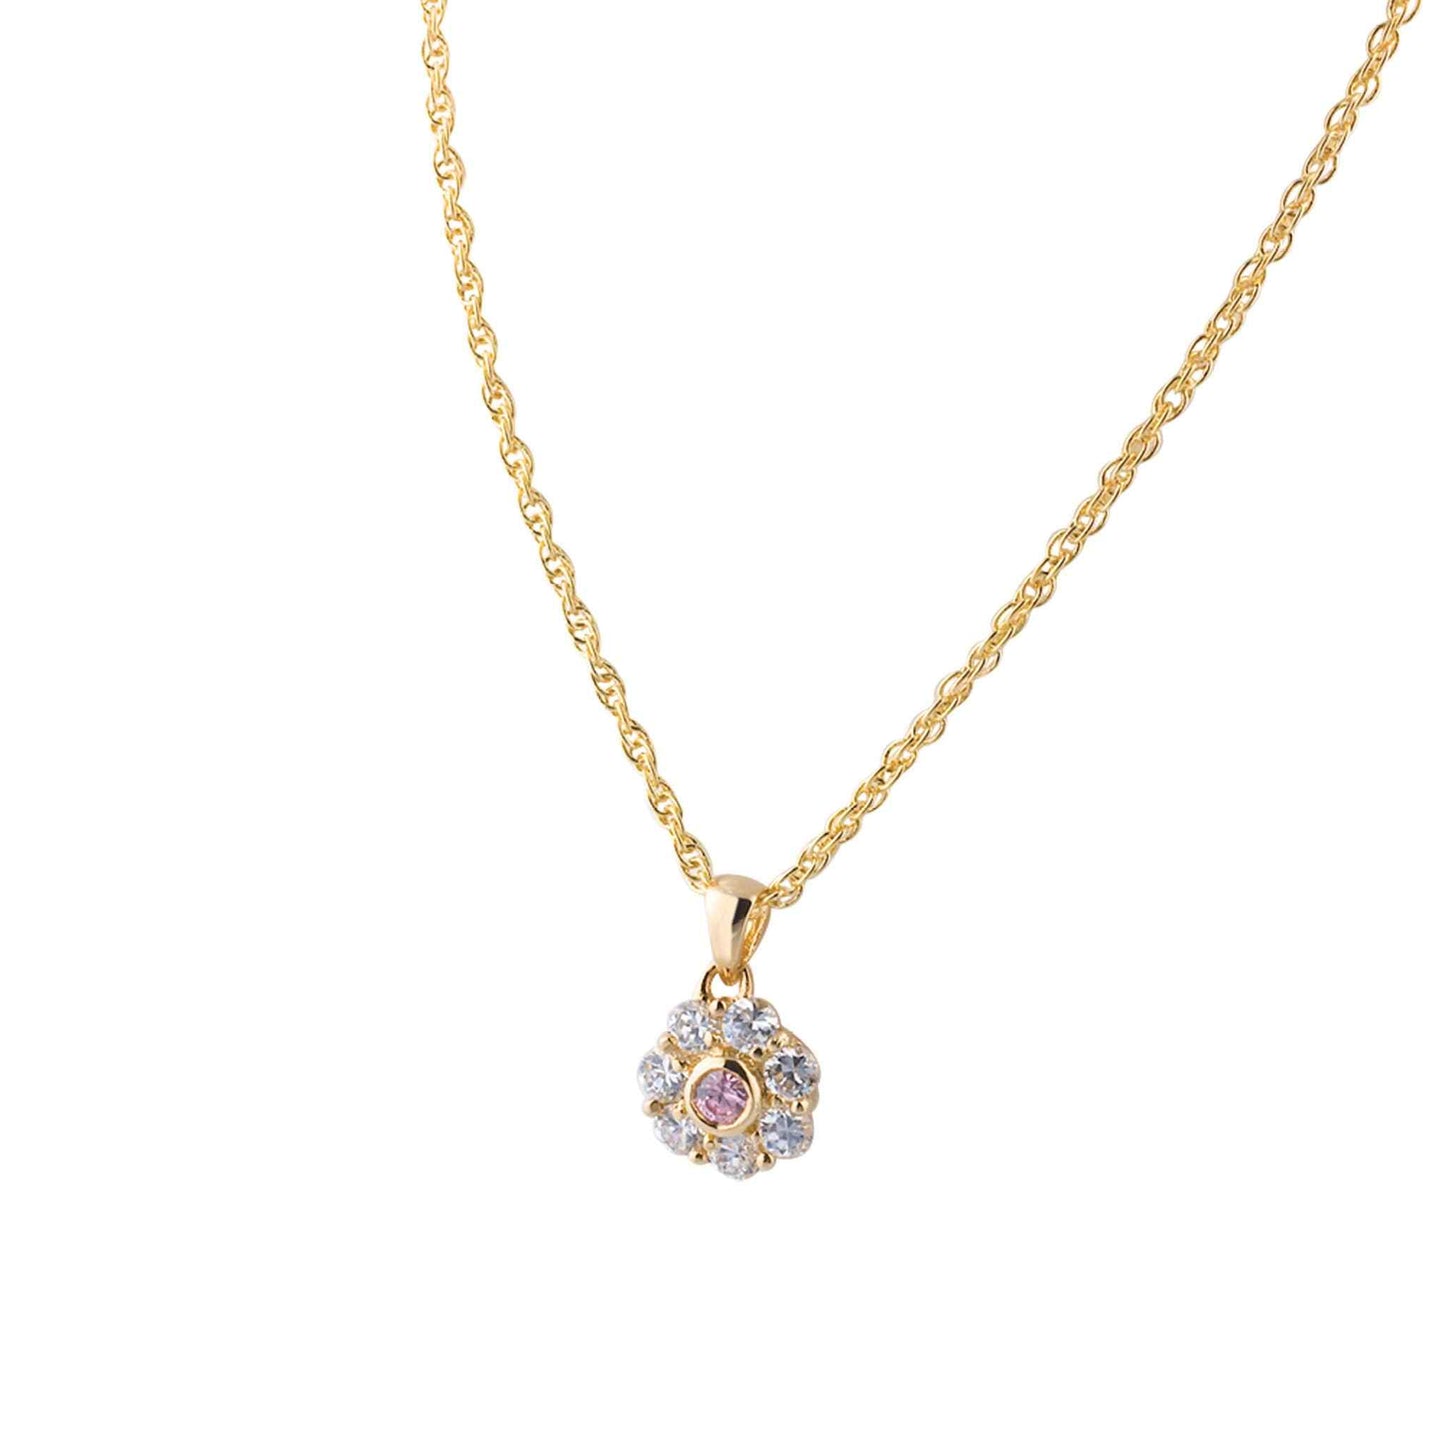 A gemstone simulated diamond flower necklace displayed on a neutral white background.